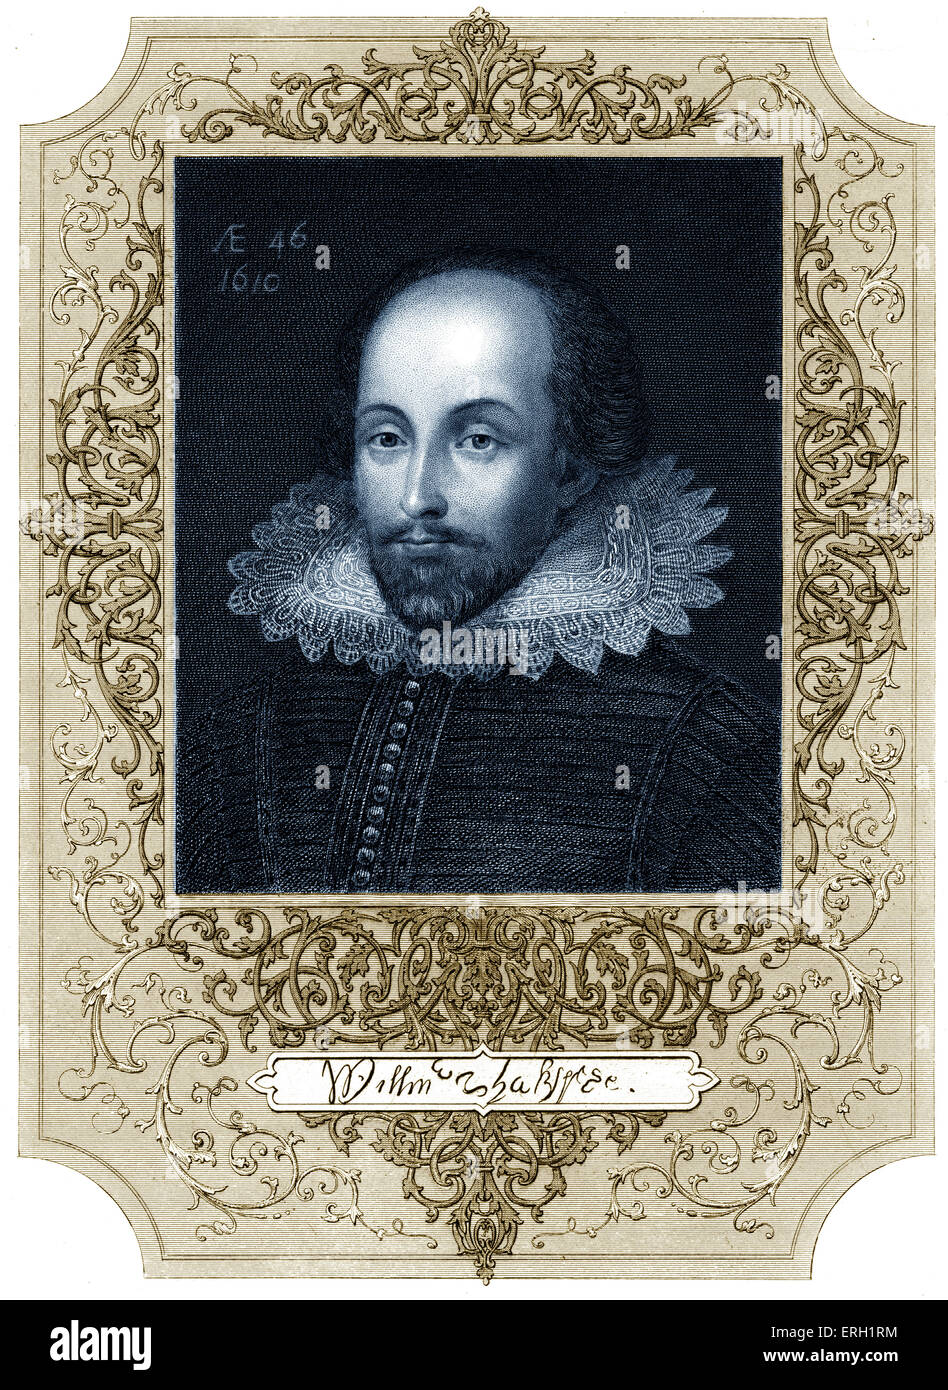 William Shakespeare, portrai with signature. Dated 1610. English poet and playwright baptised 26 April 1564 – 23 April 1616. Stock Photo